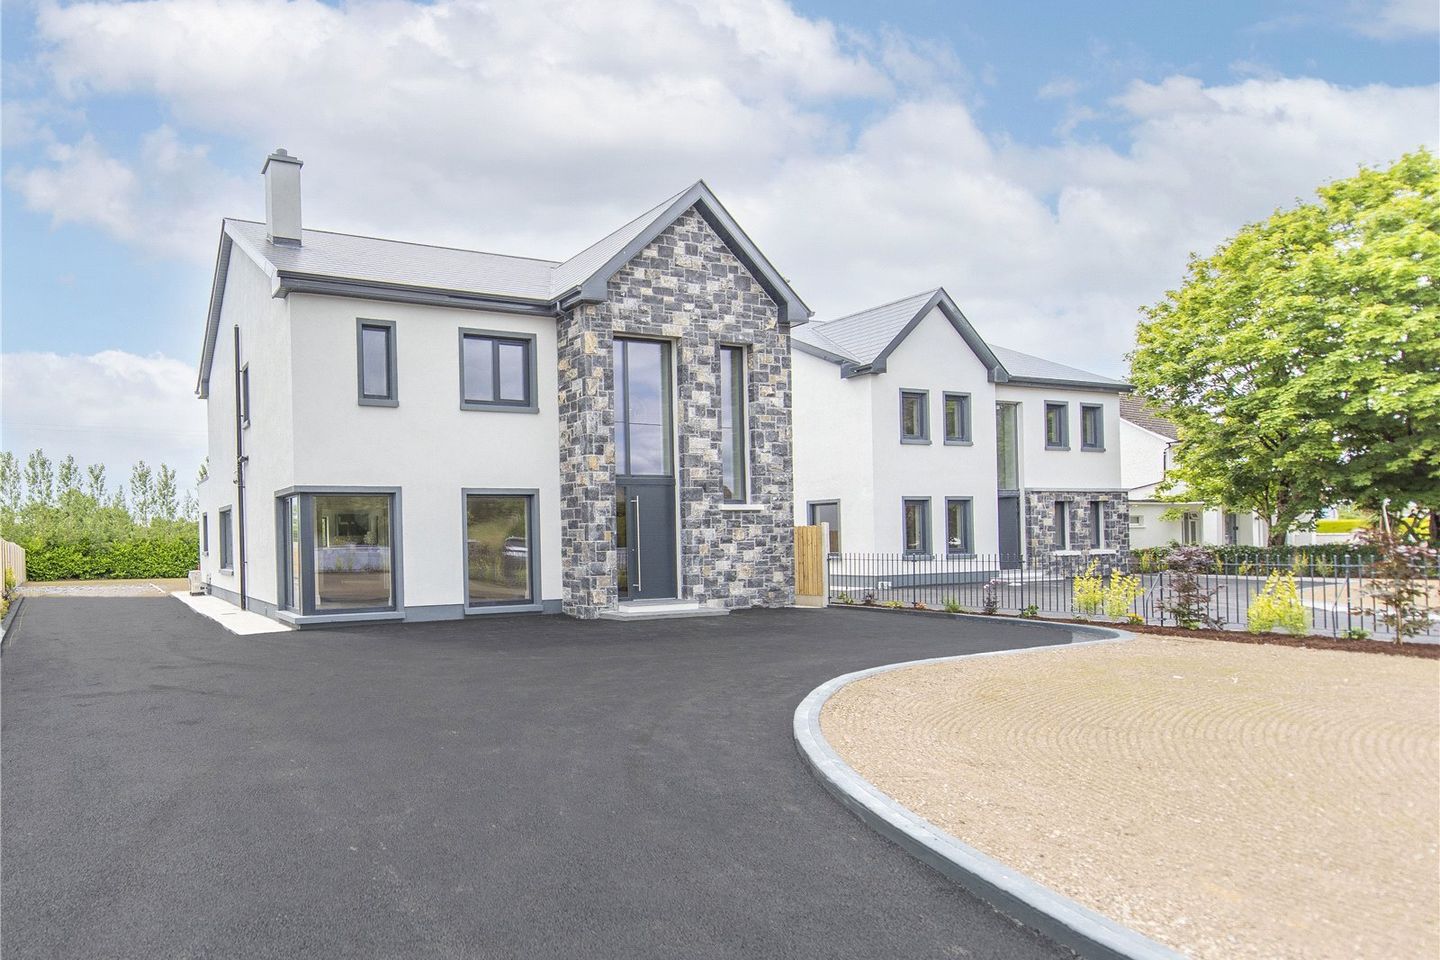 House 1, Craughwell Village, Craughwell Village, Craughwell, Co. Galway